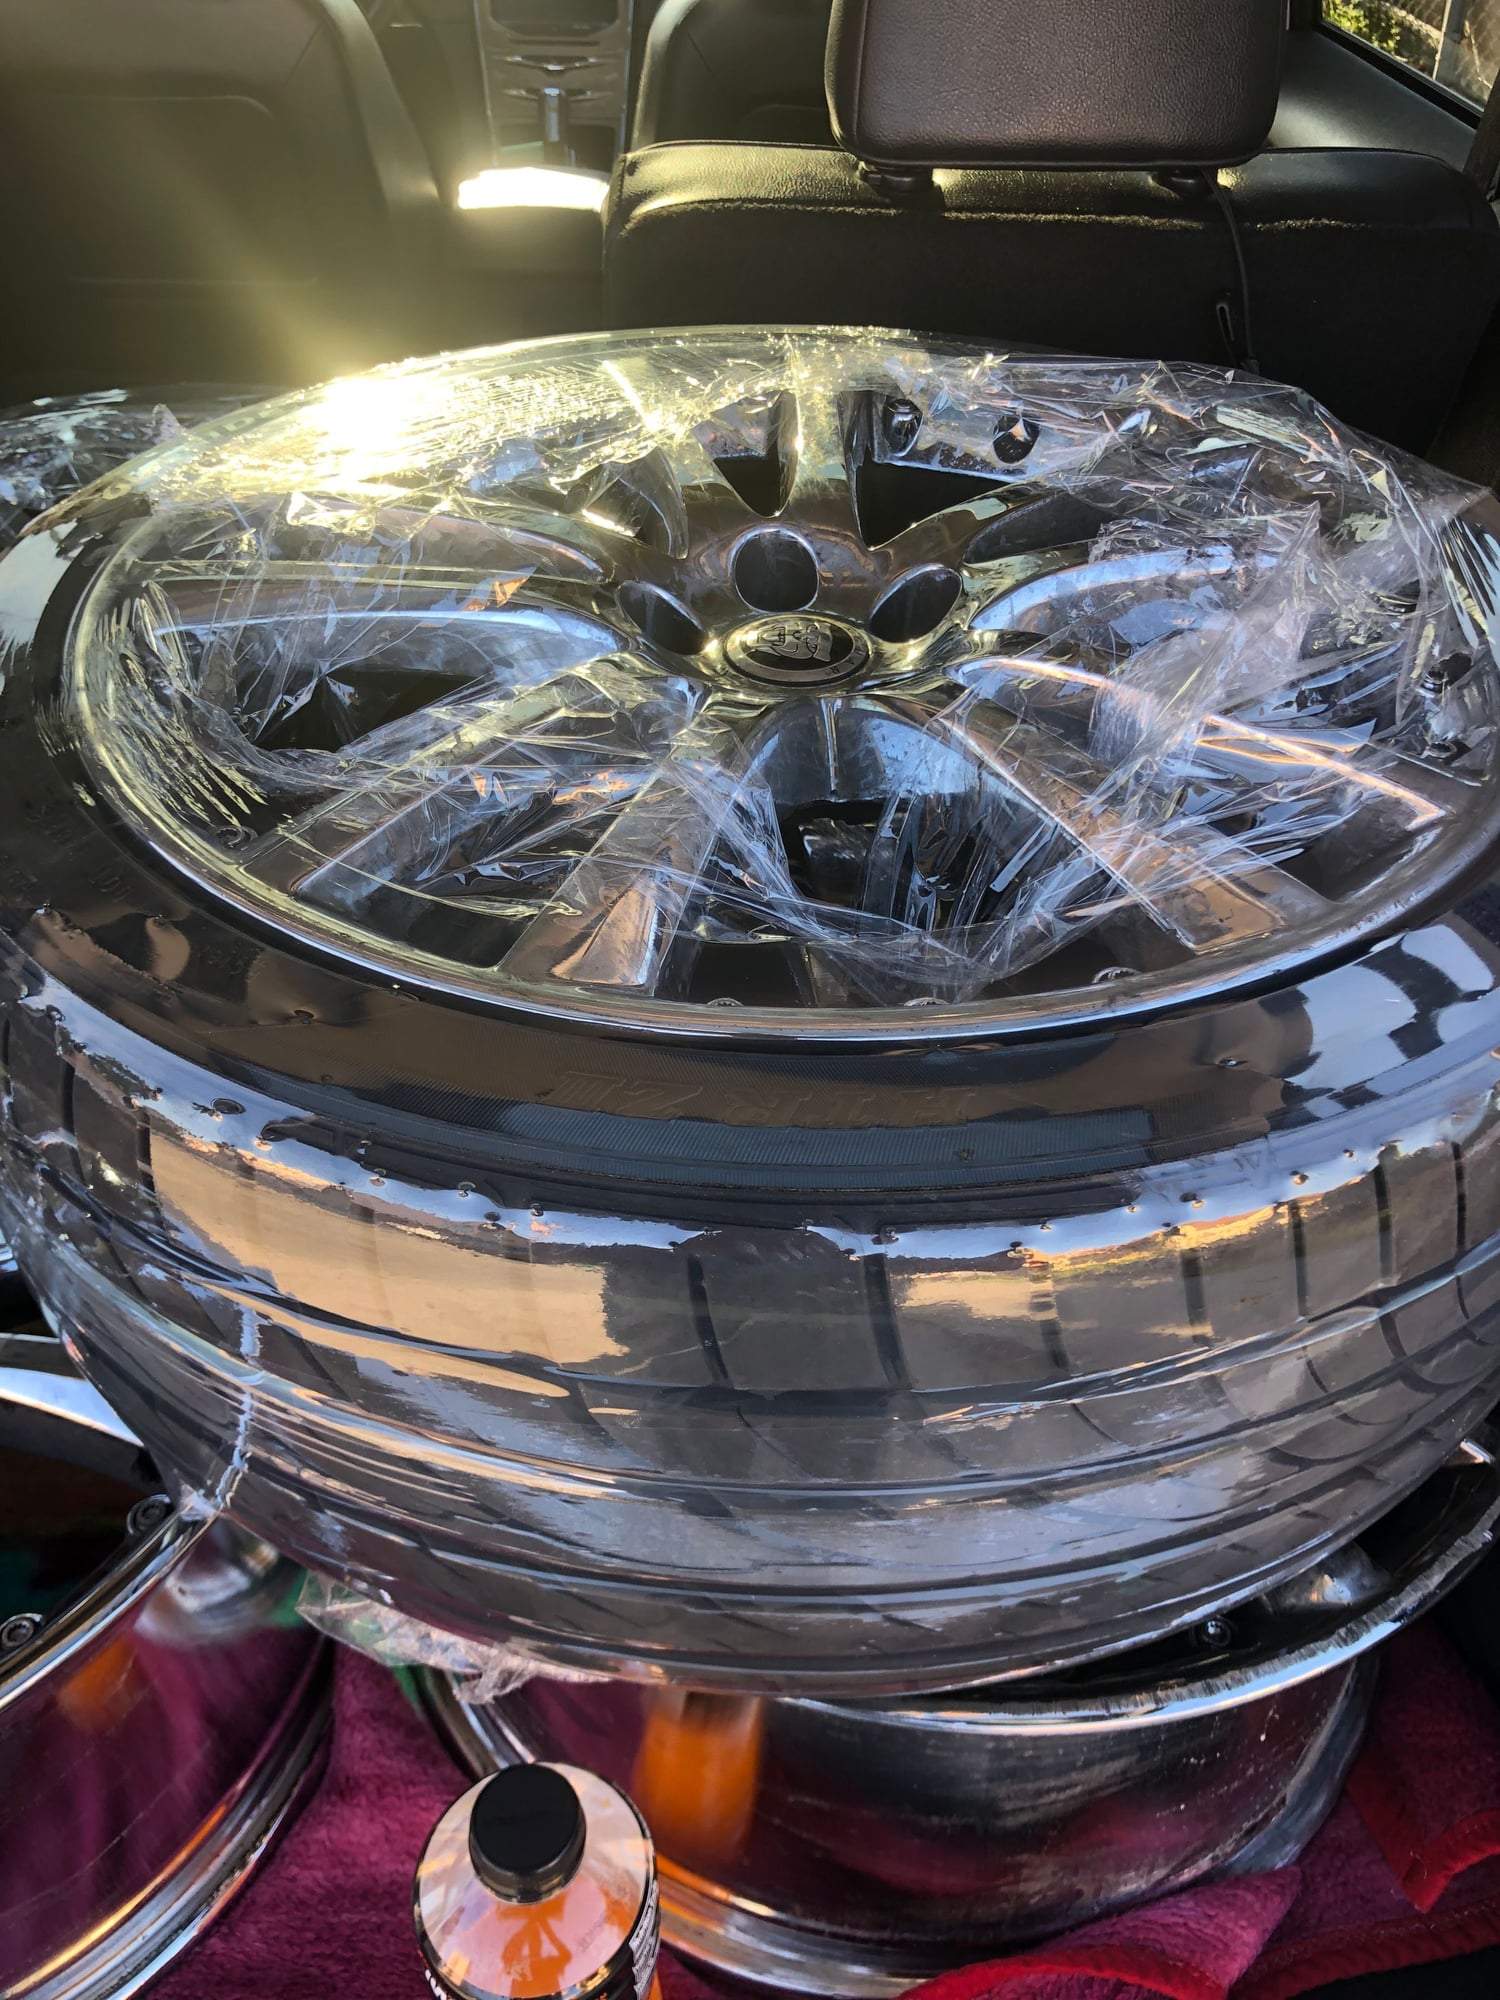 Wheels and Tires/Axles - 20 inch Selena wheels $1000 - Used - 2000 to 2014 Jaguar XK150 - Los Angeles, CA 90022, United States